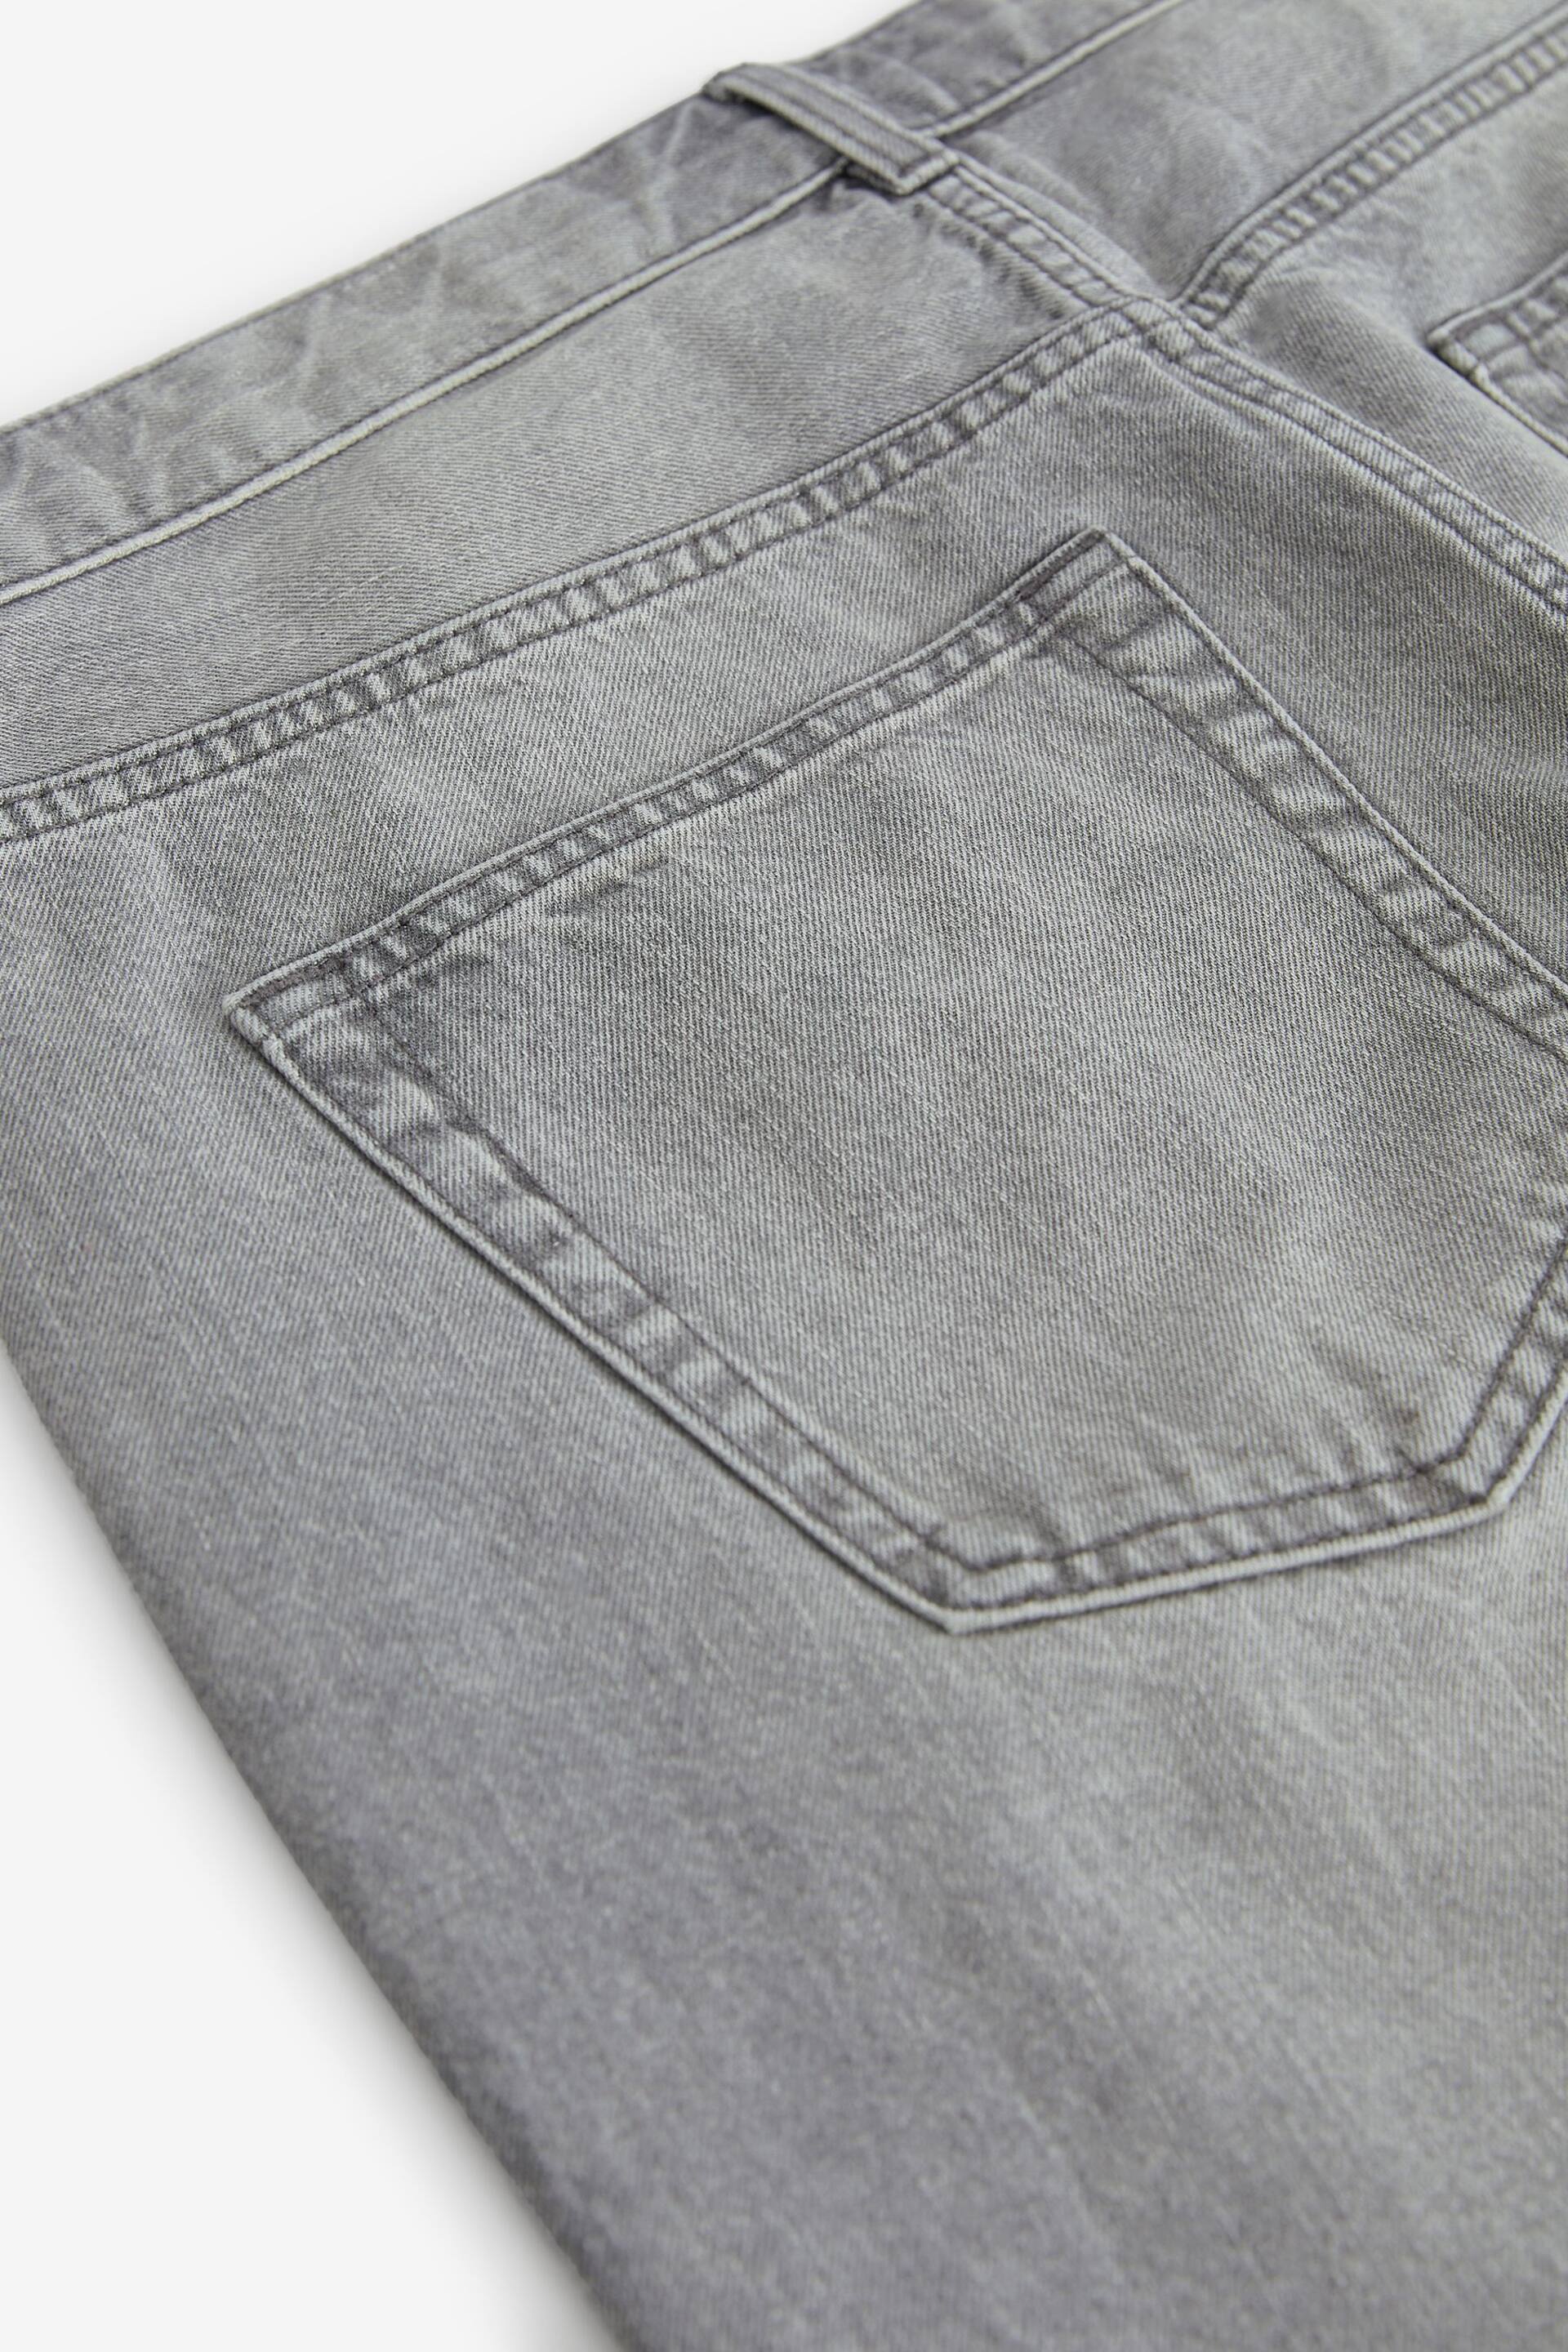 Grey Straight Fit 100% Cotton Authentic Jeans - Image 9 of 10